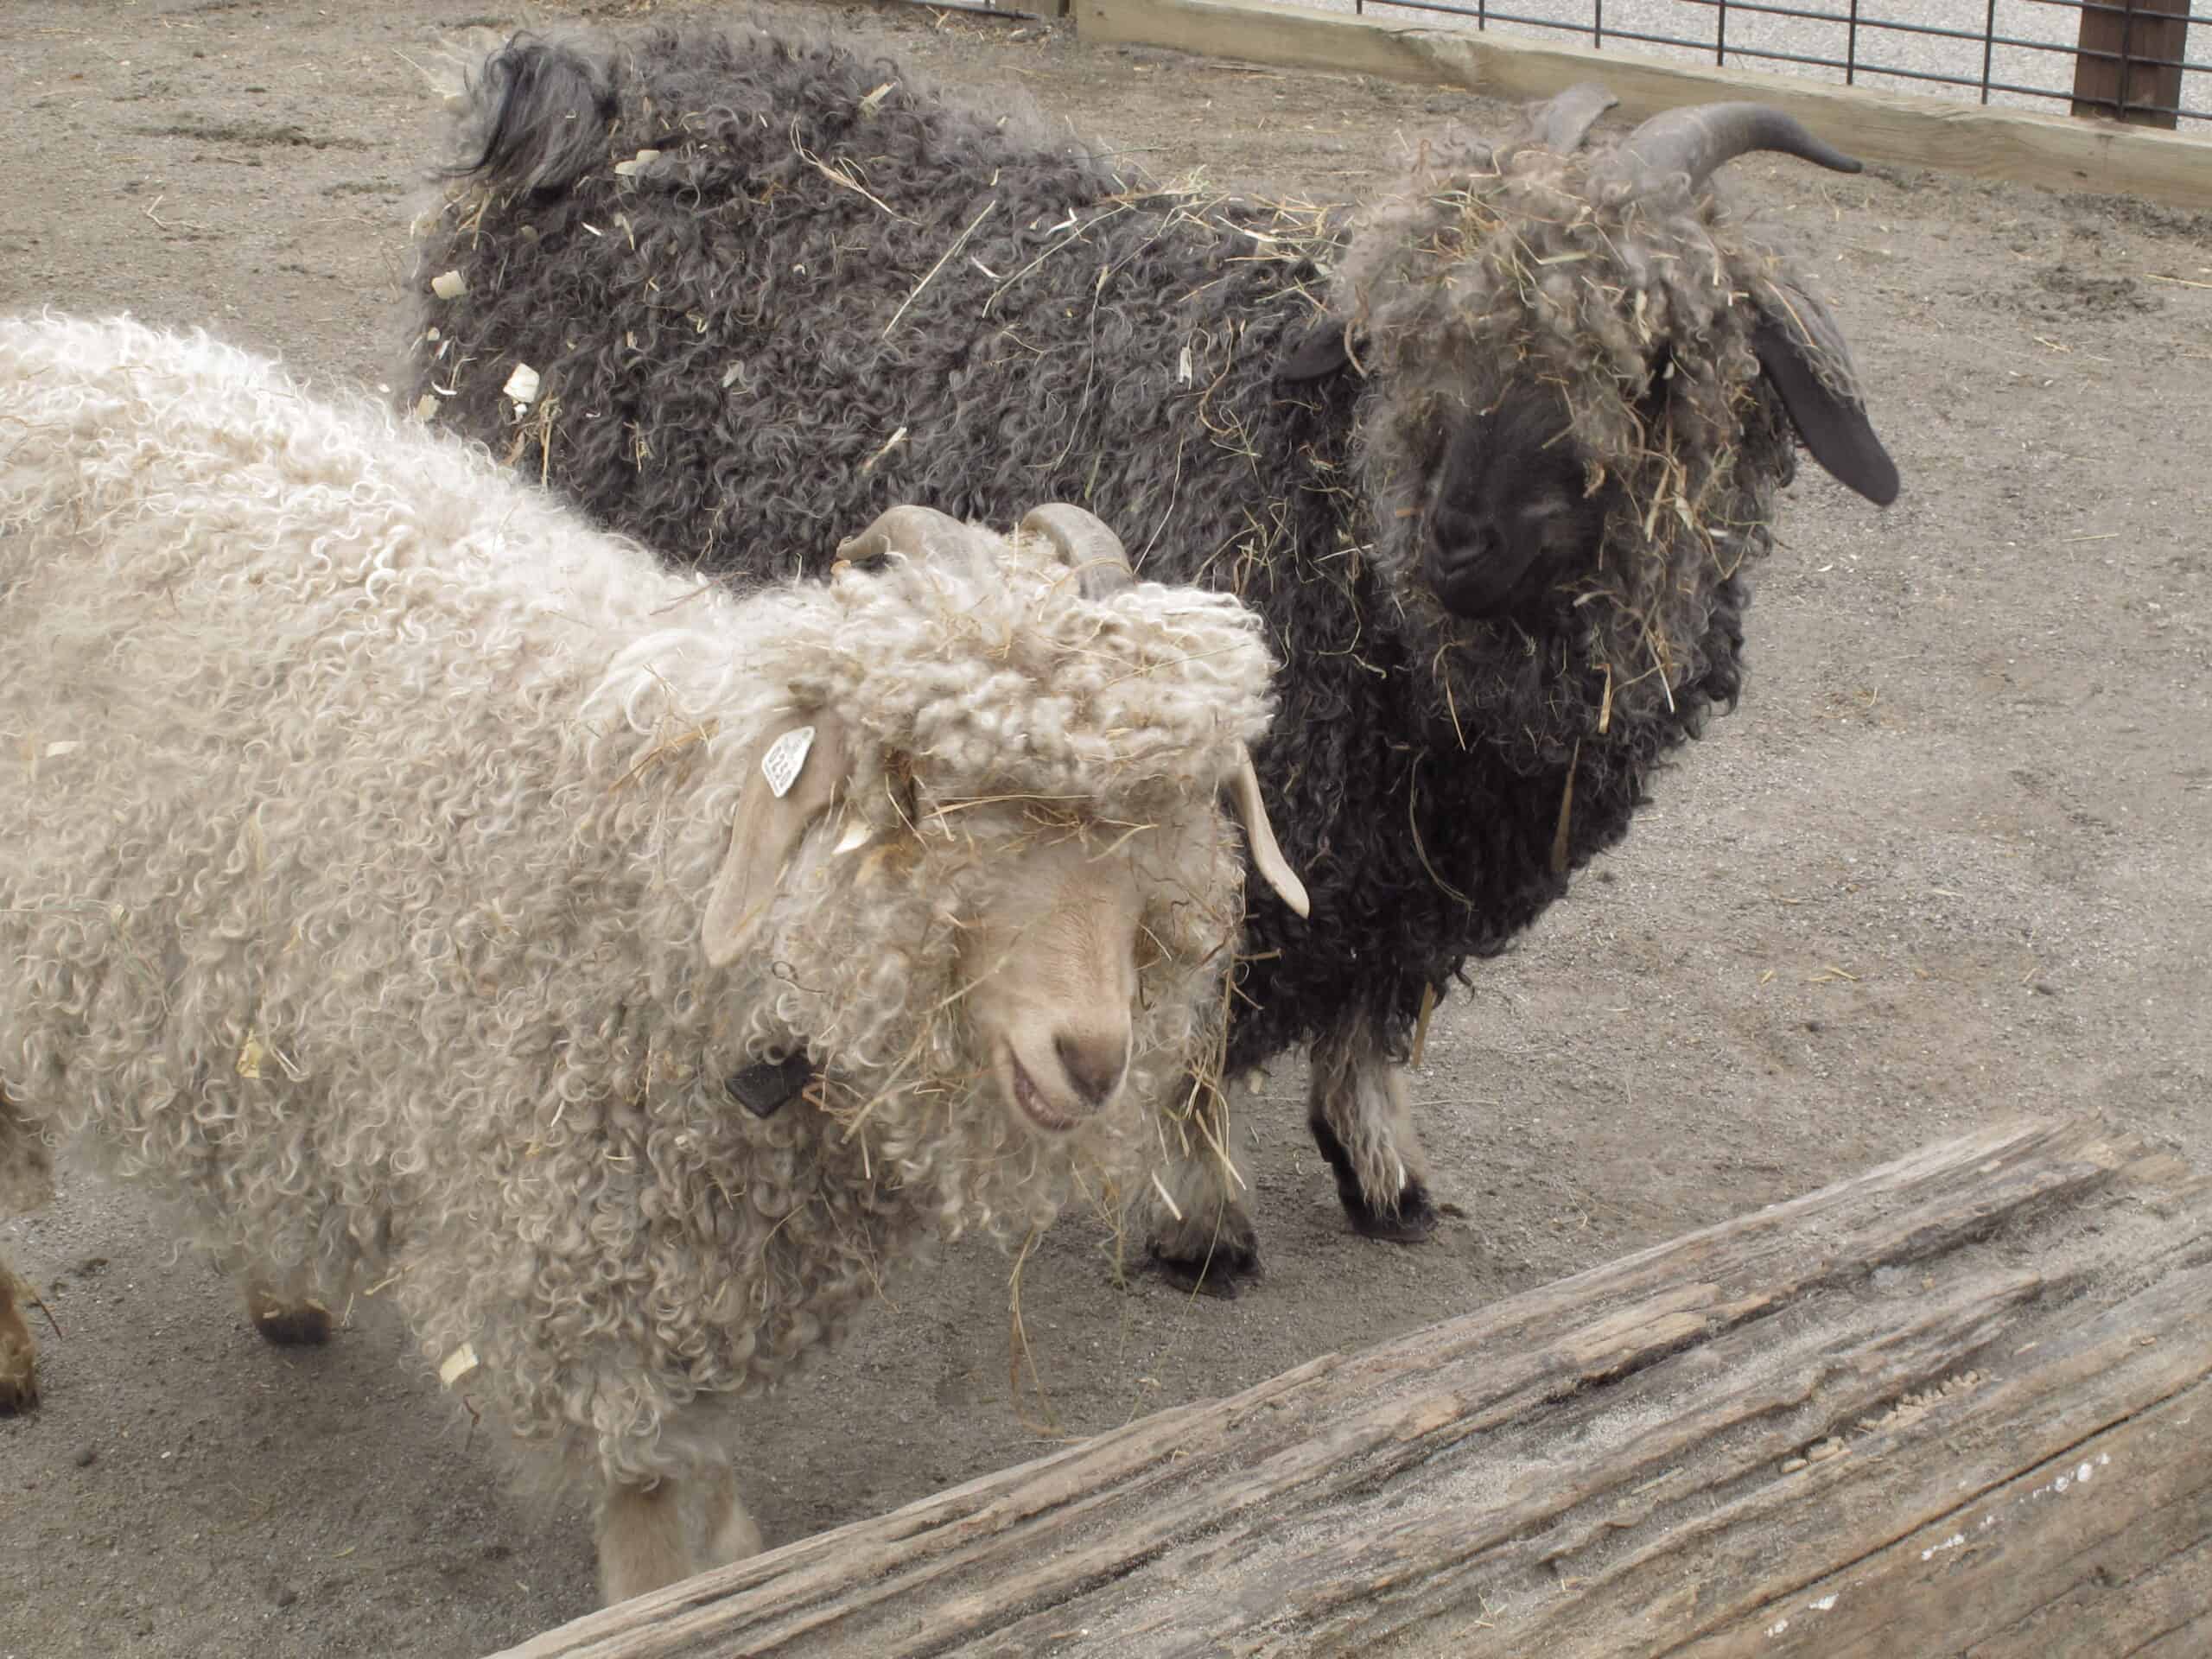 Bill and Ted the Angora Goats